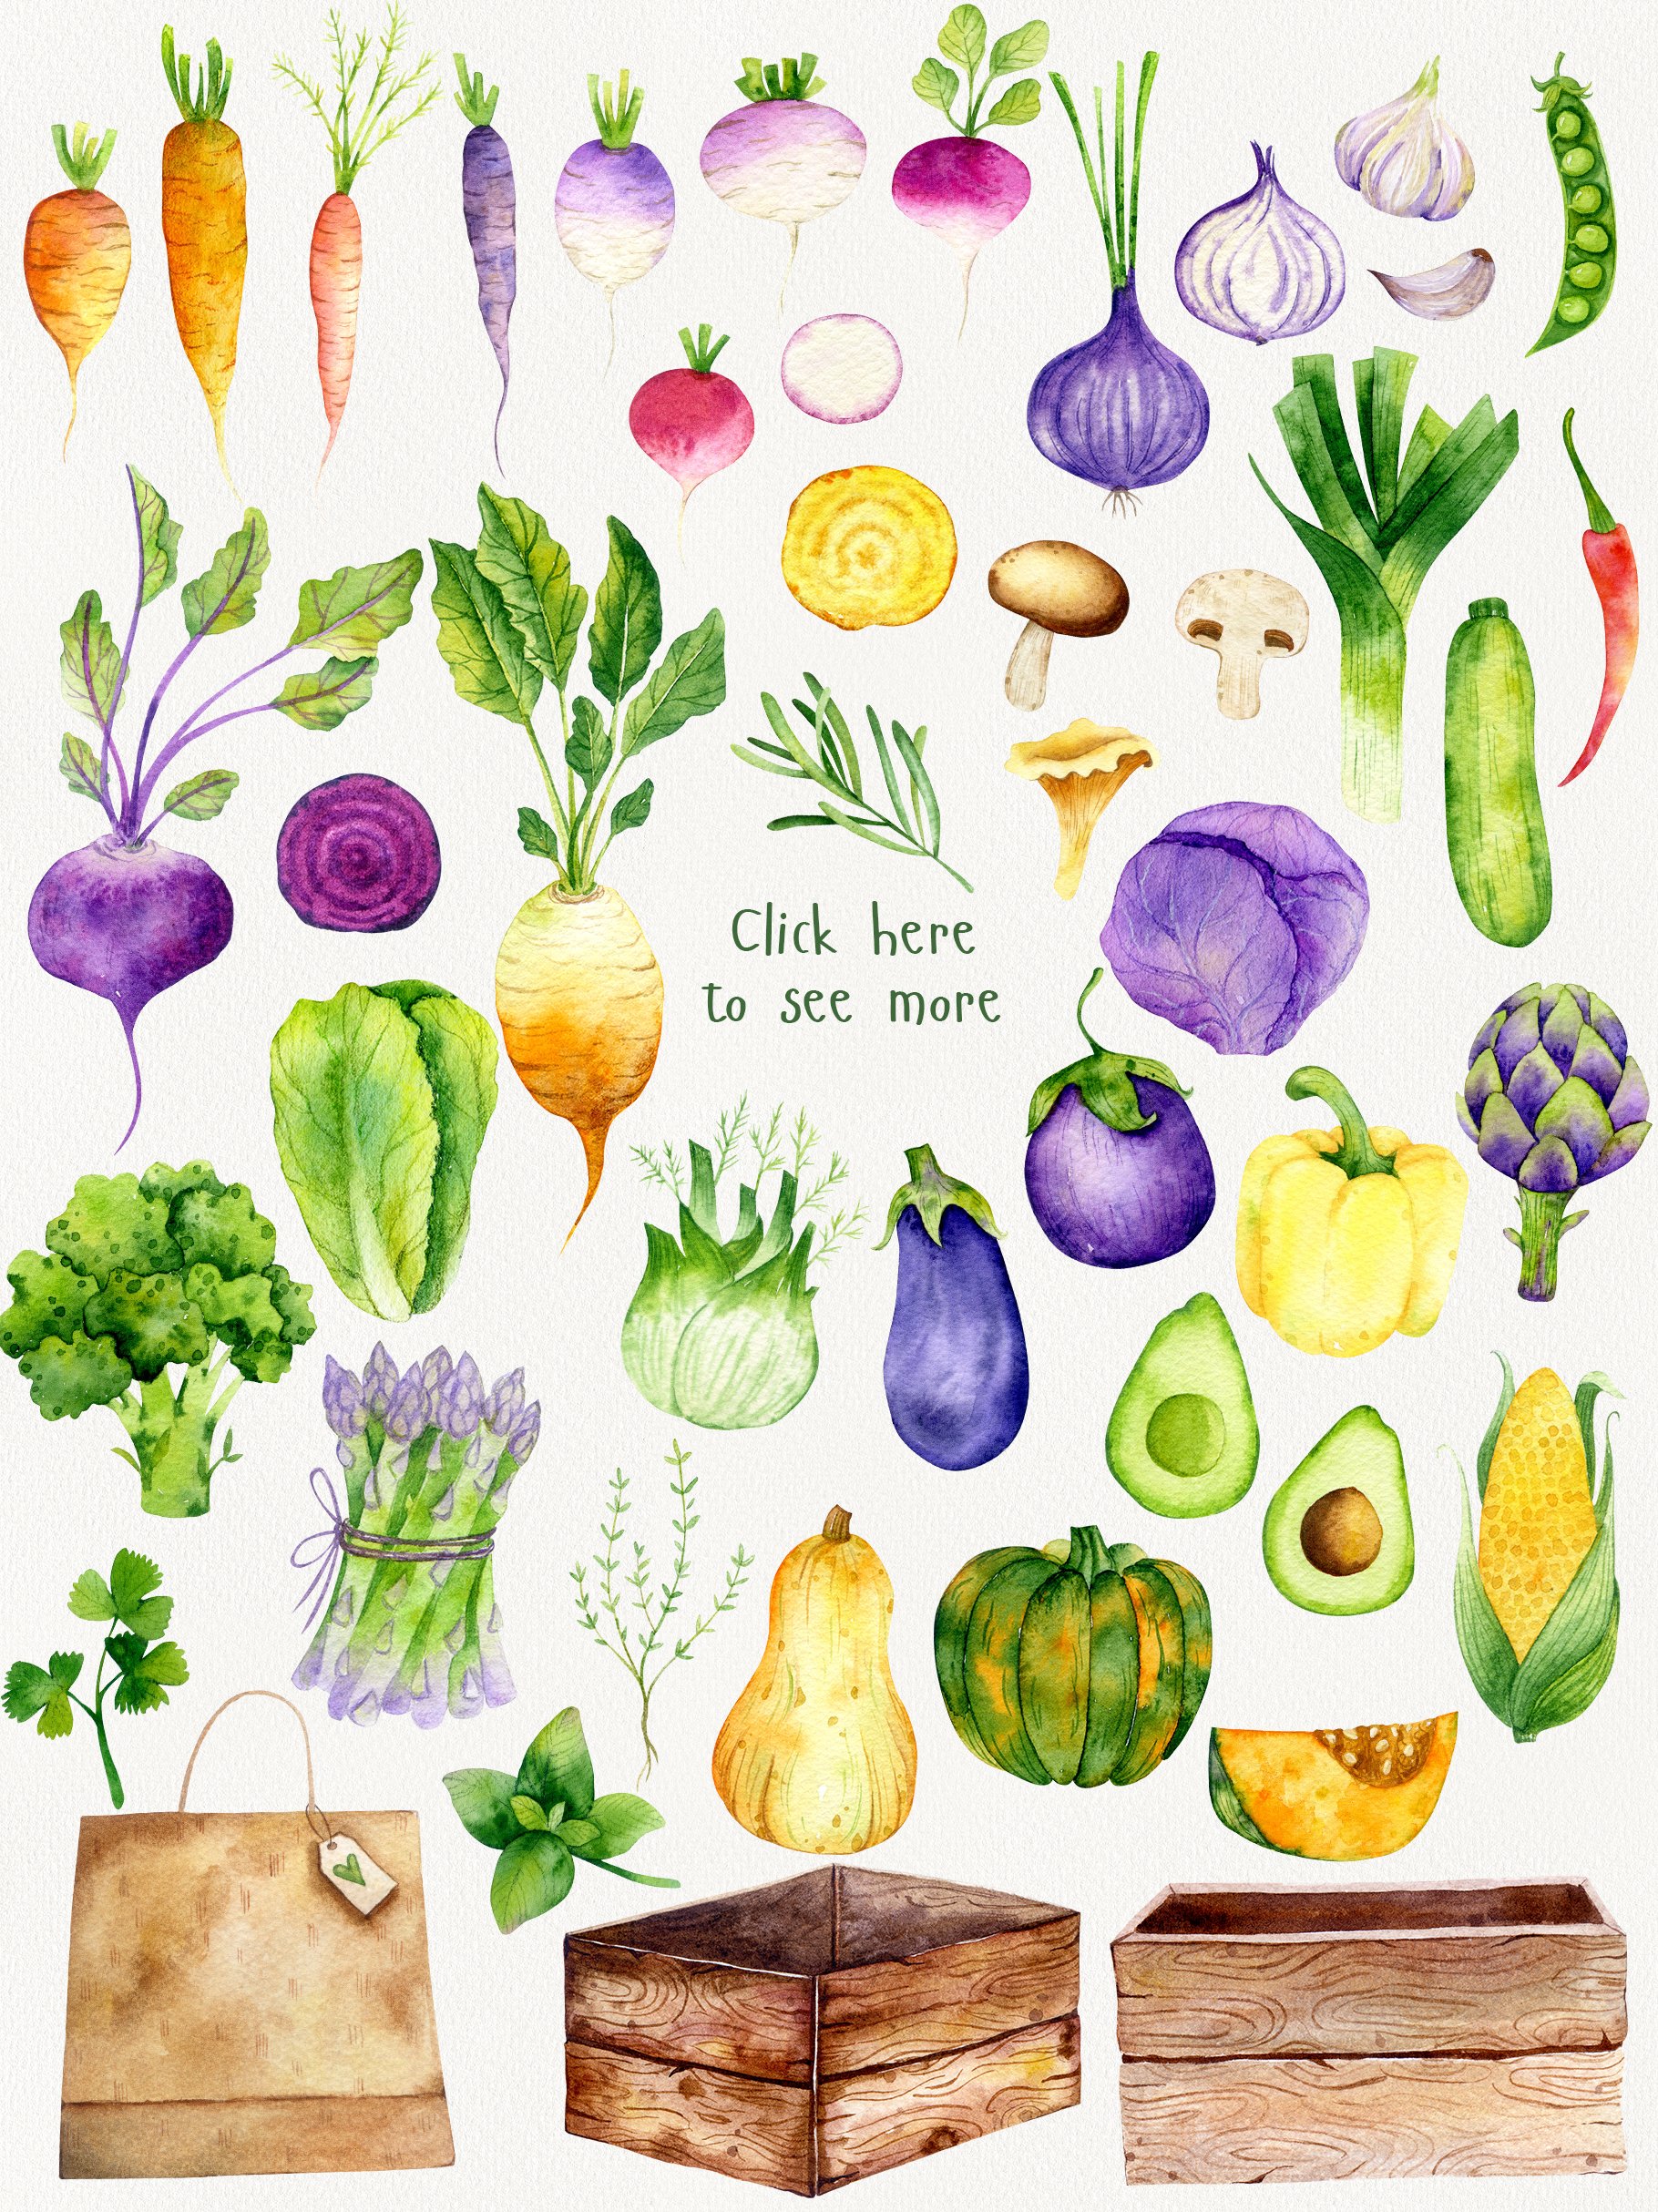 Vegetables and fruits images.